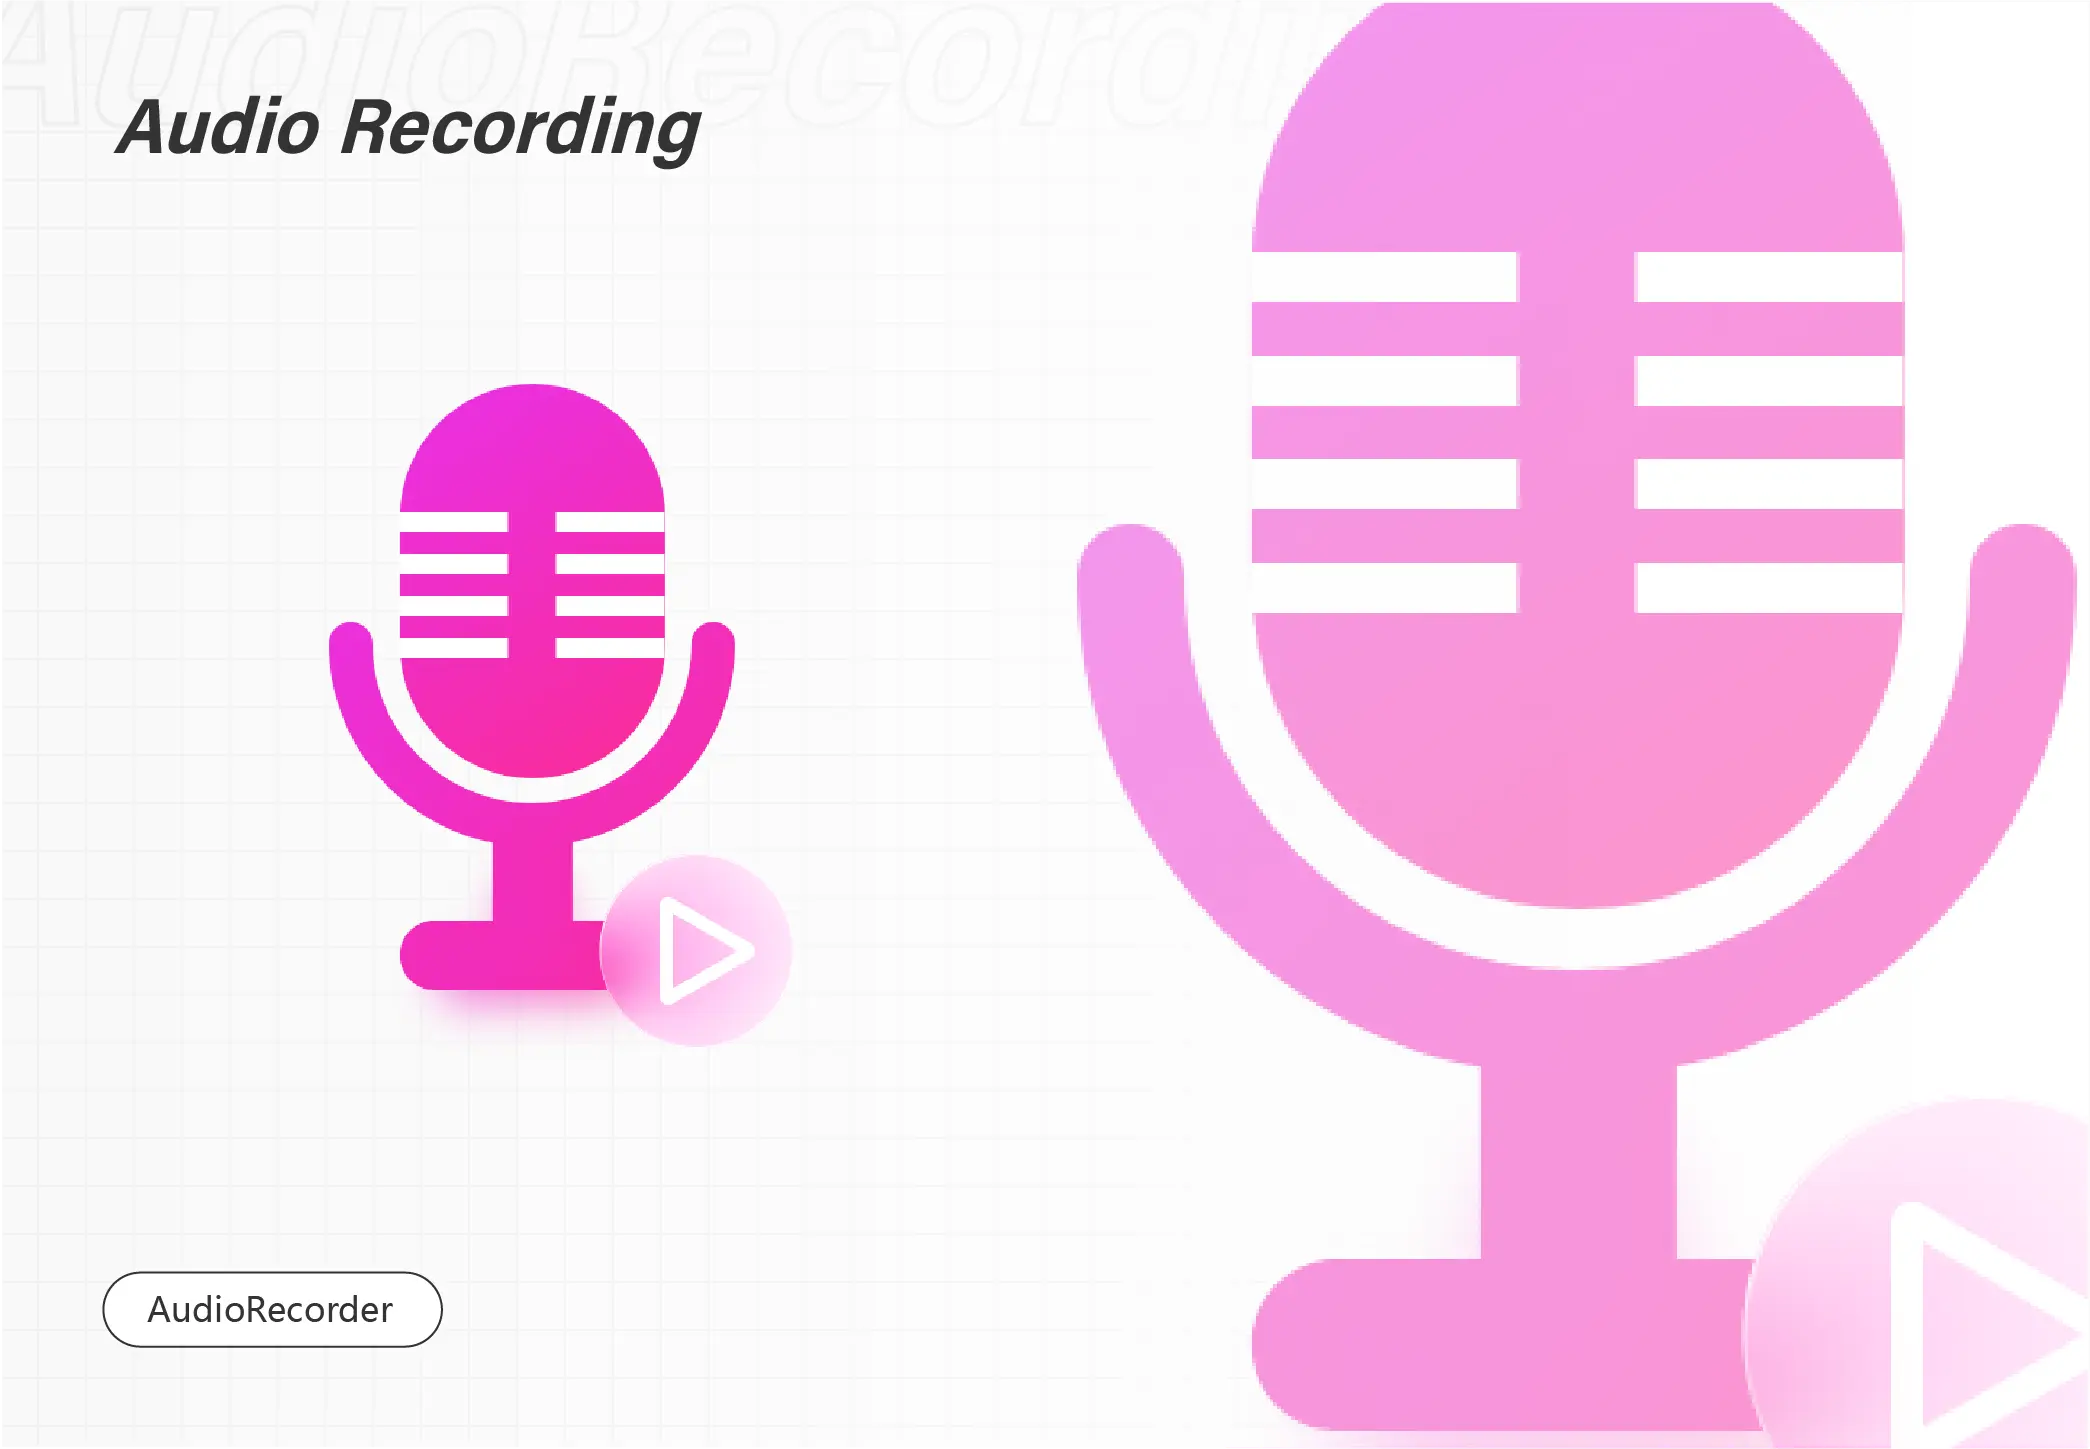 4 Best Audio Recording Software for PC in 2022